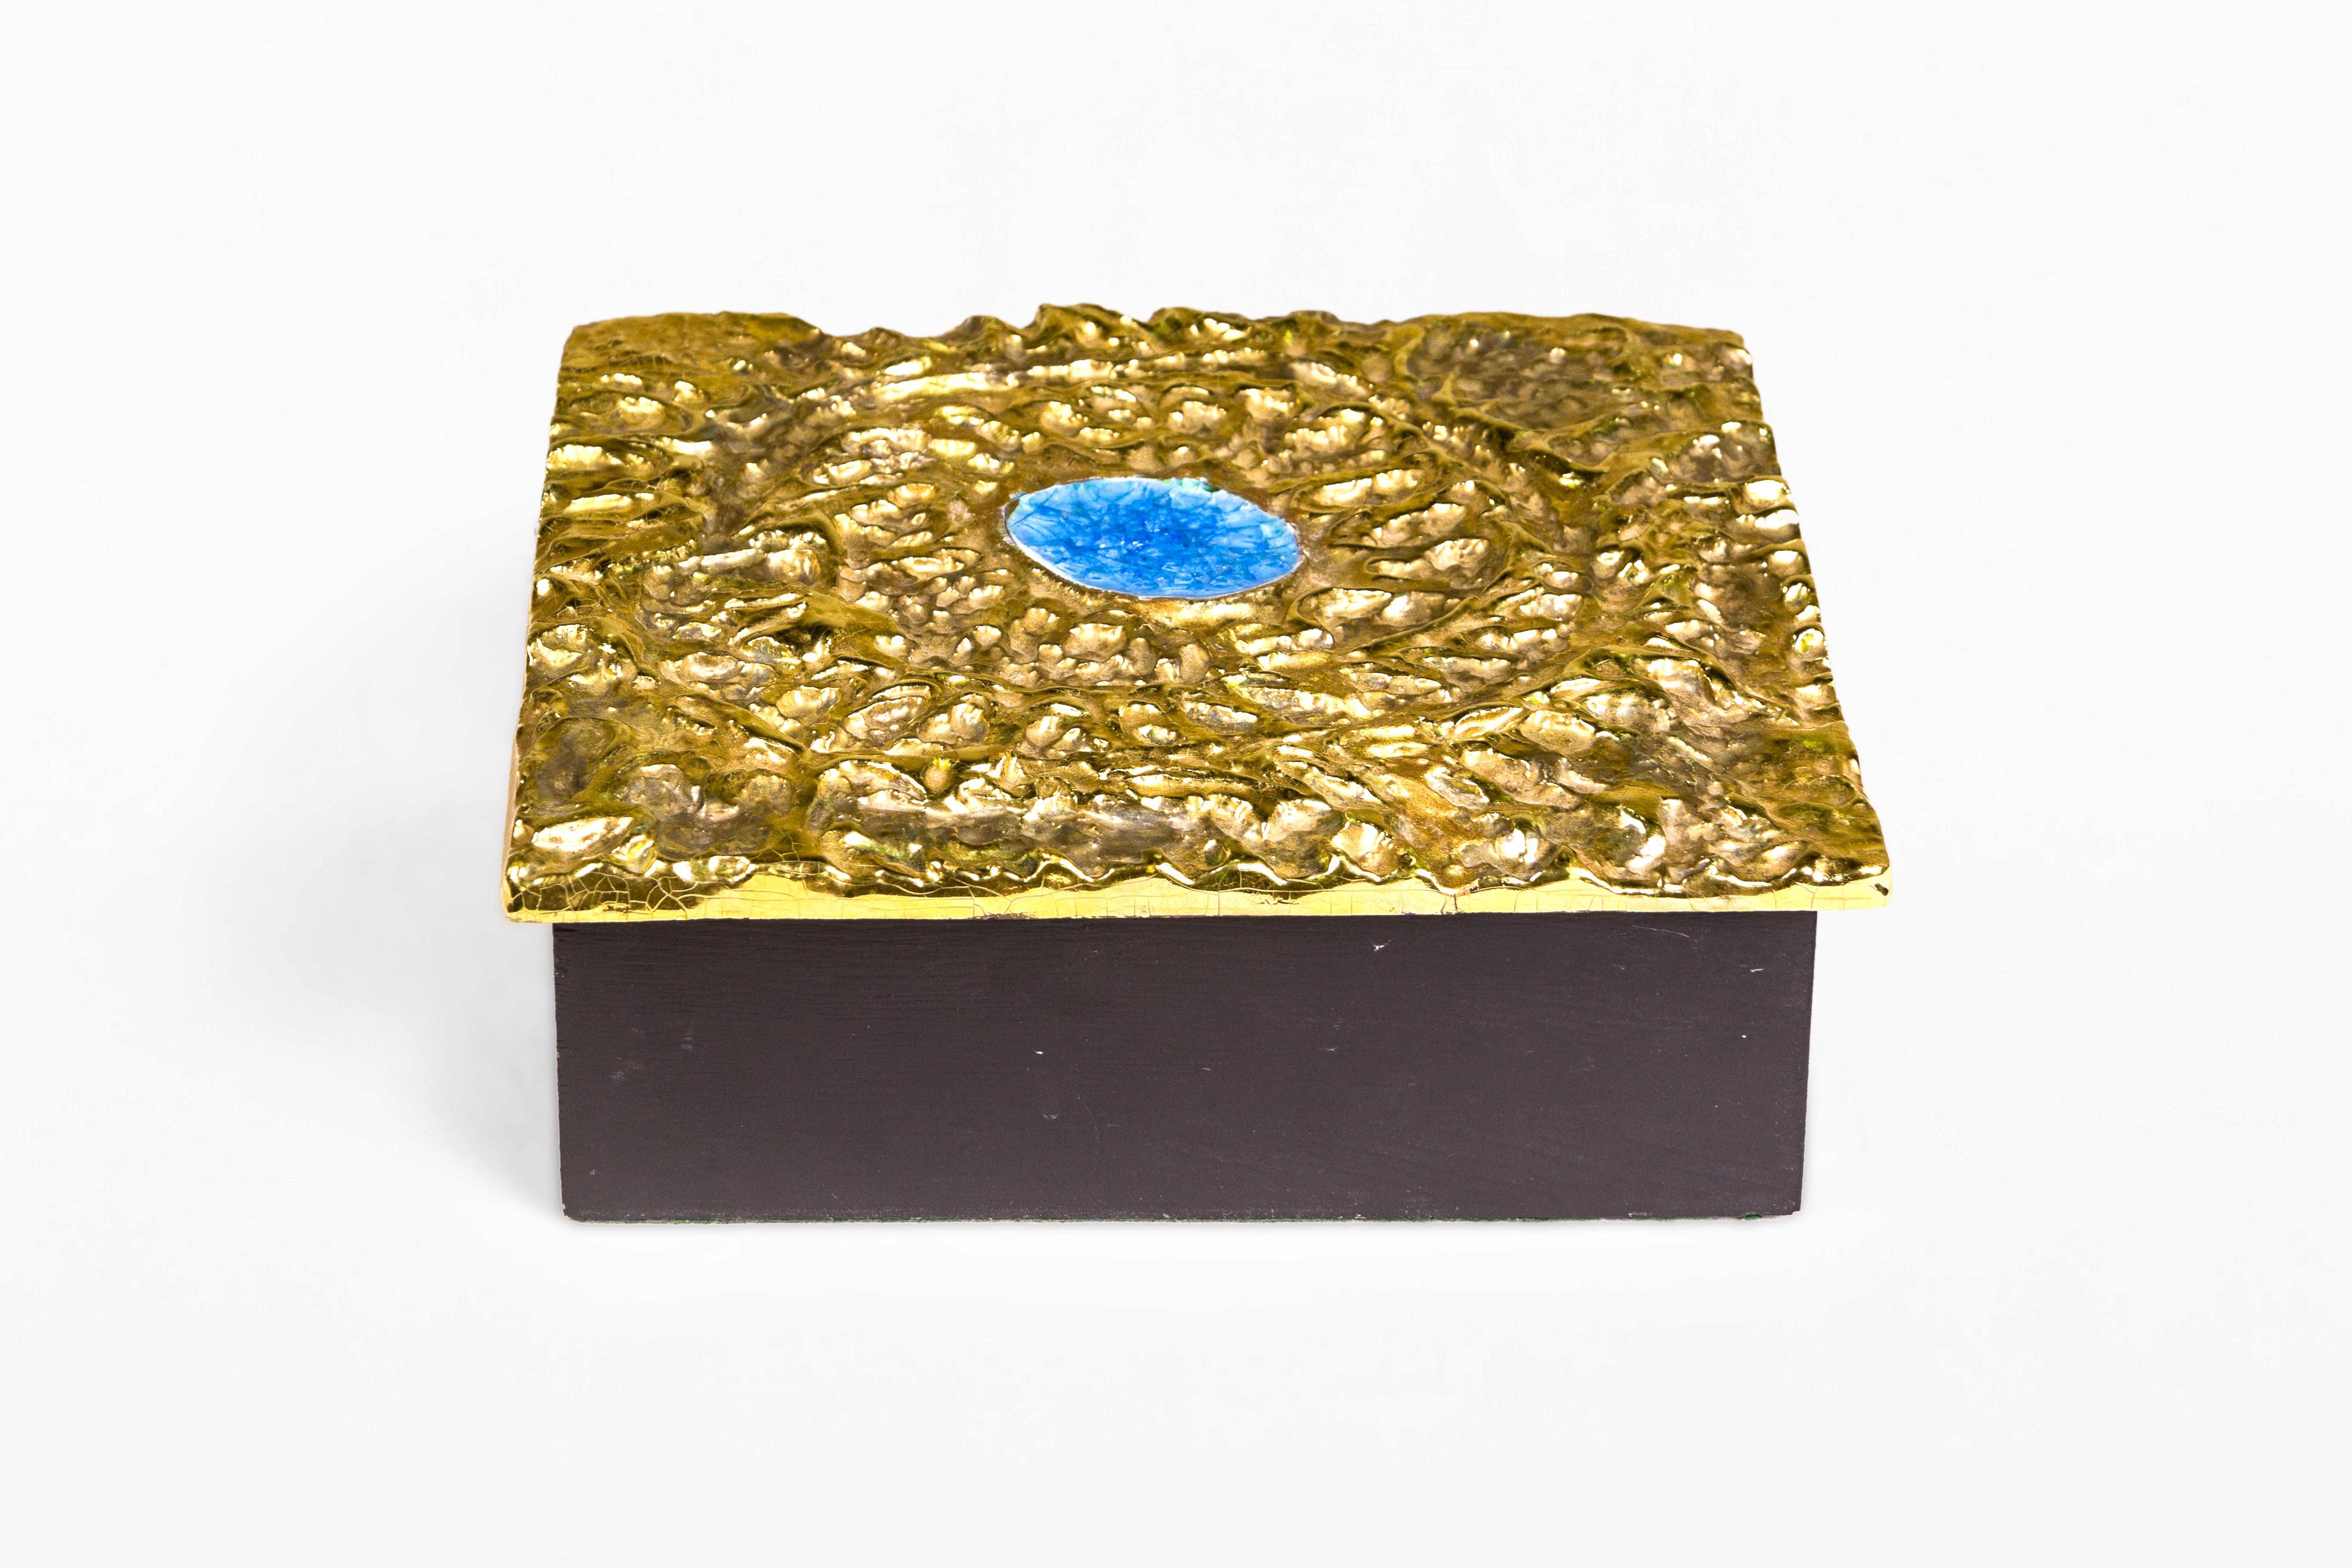 Mithé Espelt box.
Glazed embossed earthenware.
Crackled gold and crystallized blue glass.
Original felt.
Circa 1960, France.
Very good vintage condition.
The life of Mithé Espelt is a real saga. Born in 1923 in Lunel, in the Camargue in the